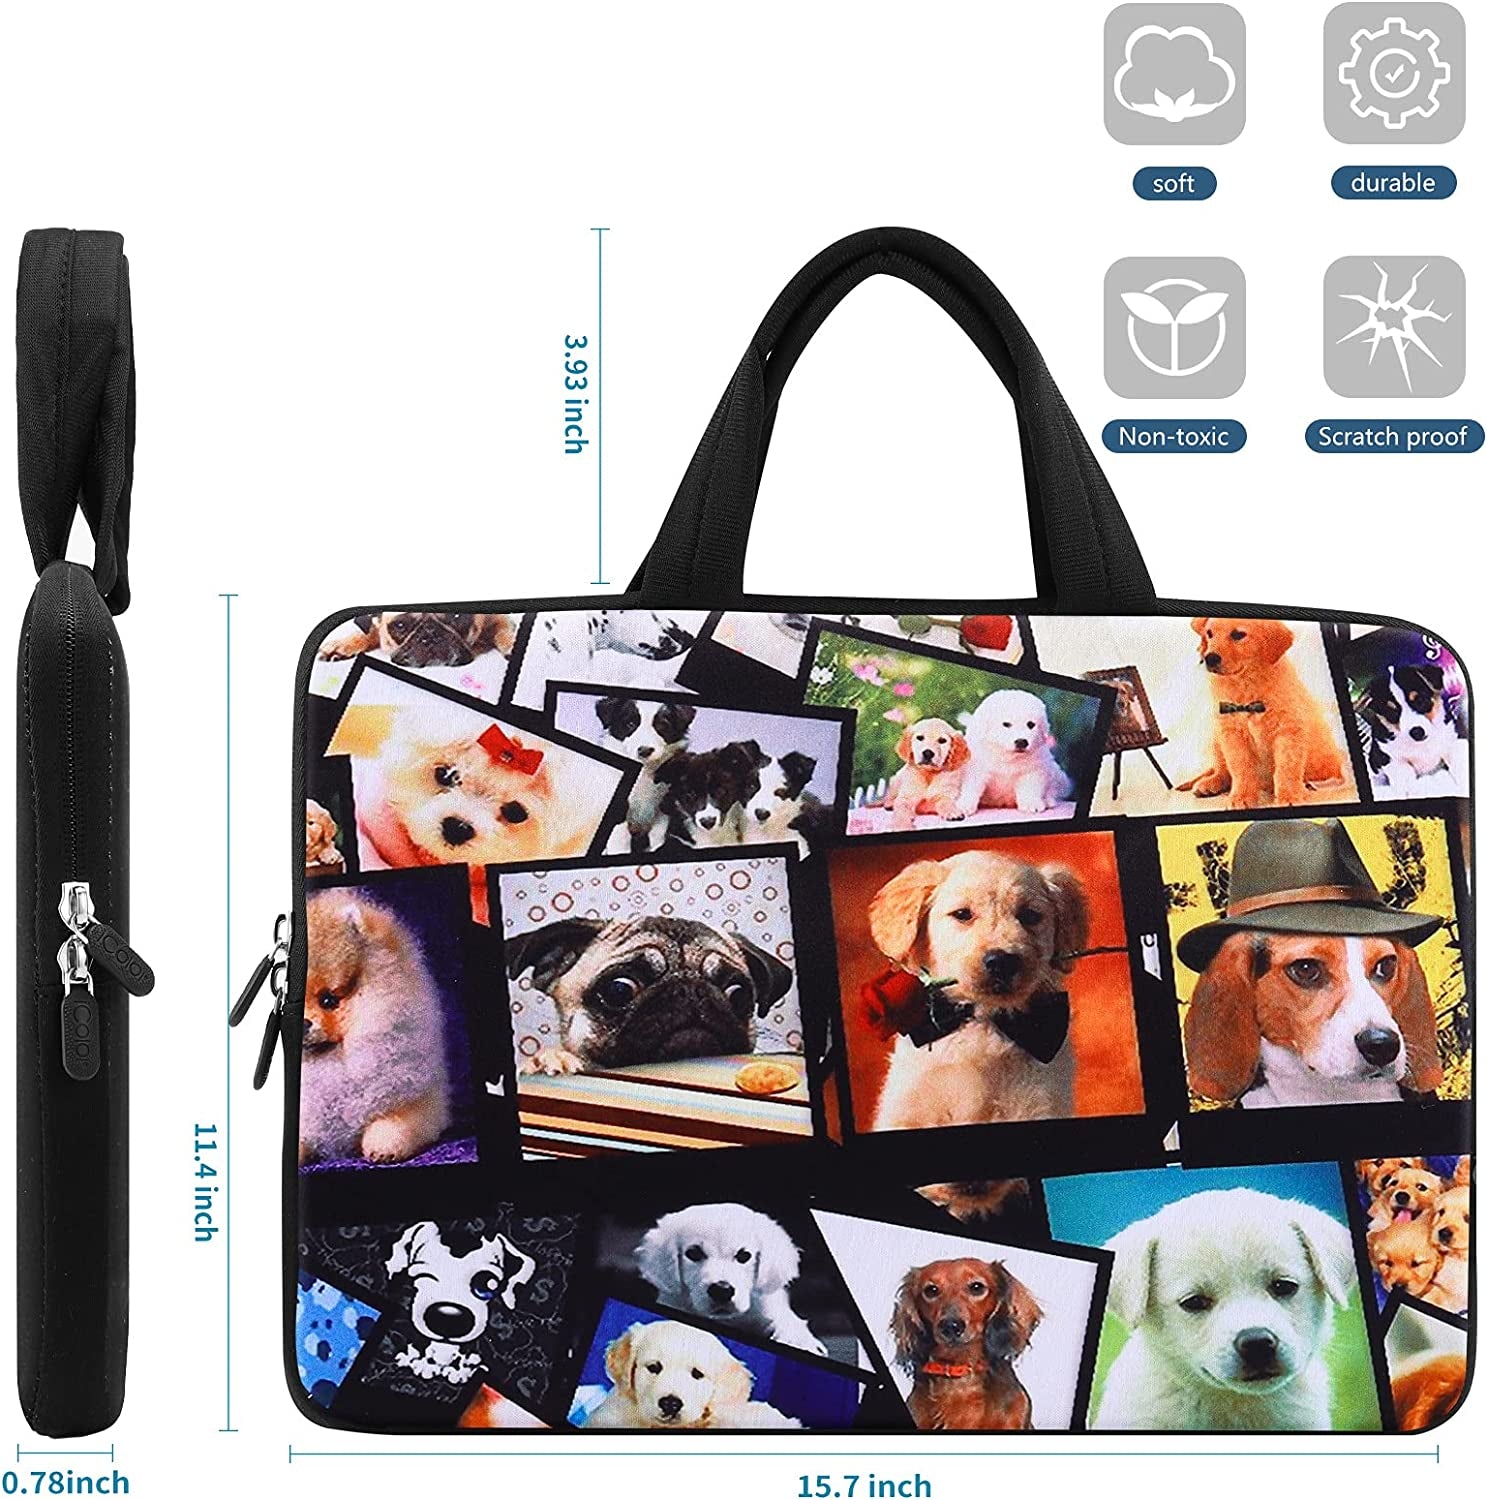 ICOLOR 14 15 15.4 15.6 Inch Laptop Handle Bag Computer Protect Case Pouch Holder Notebook Sleeve Neoprene Cover Soft Carring Travel Case Laptop Tote Bag Puppy ICB-08